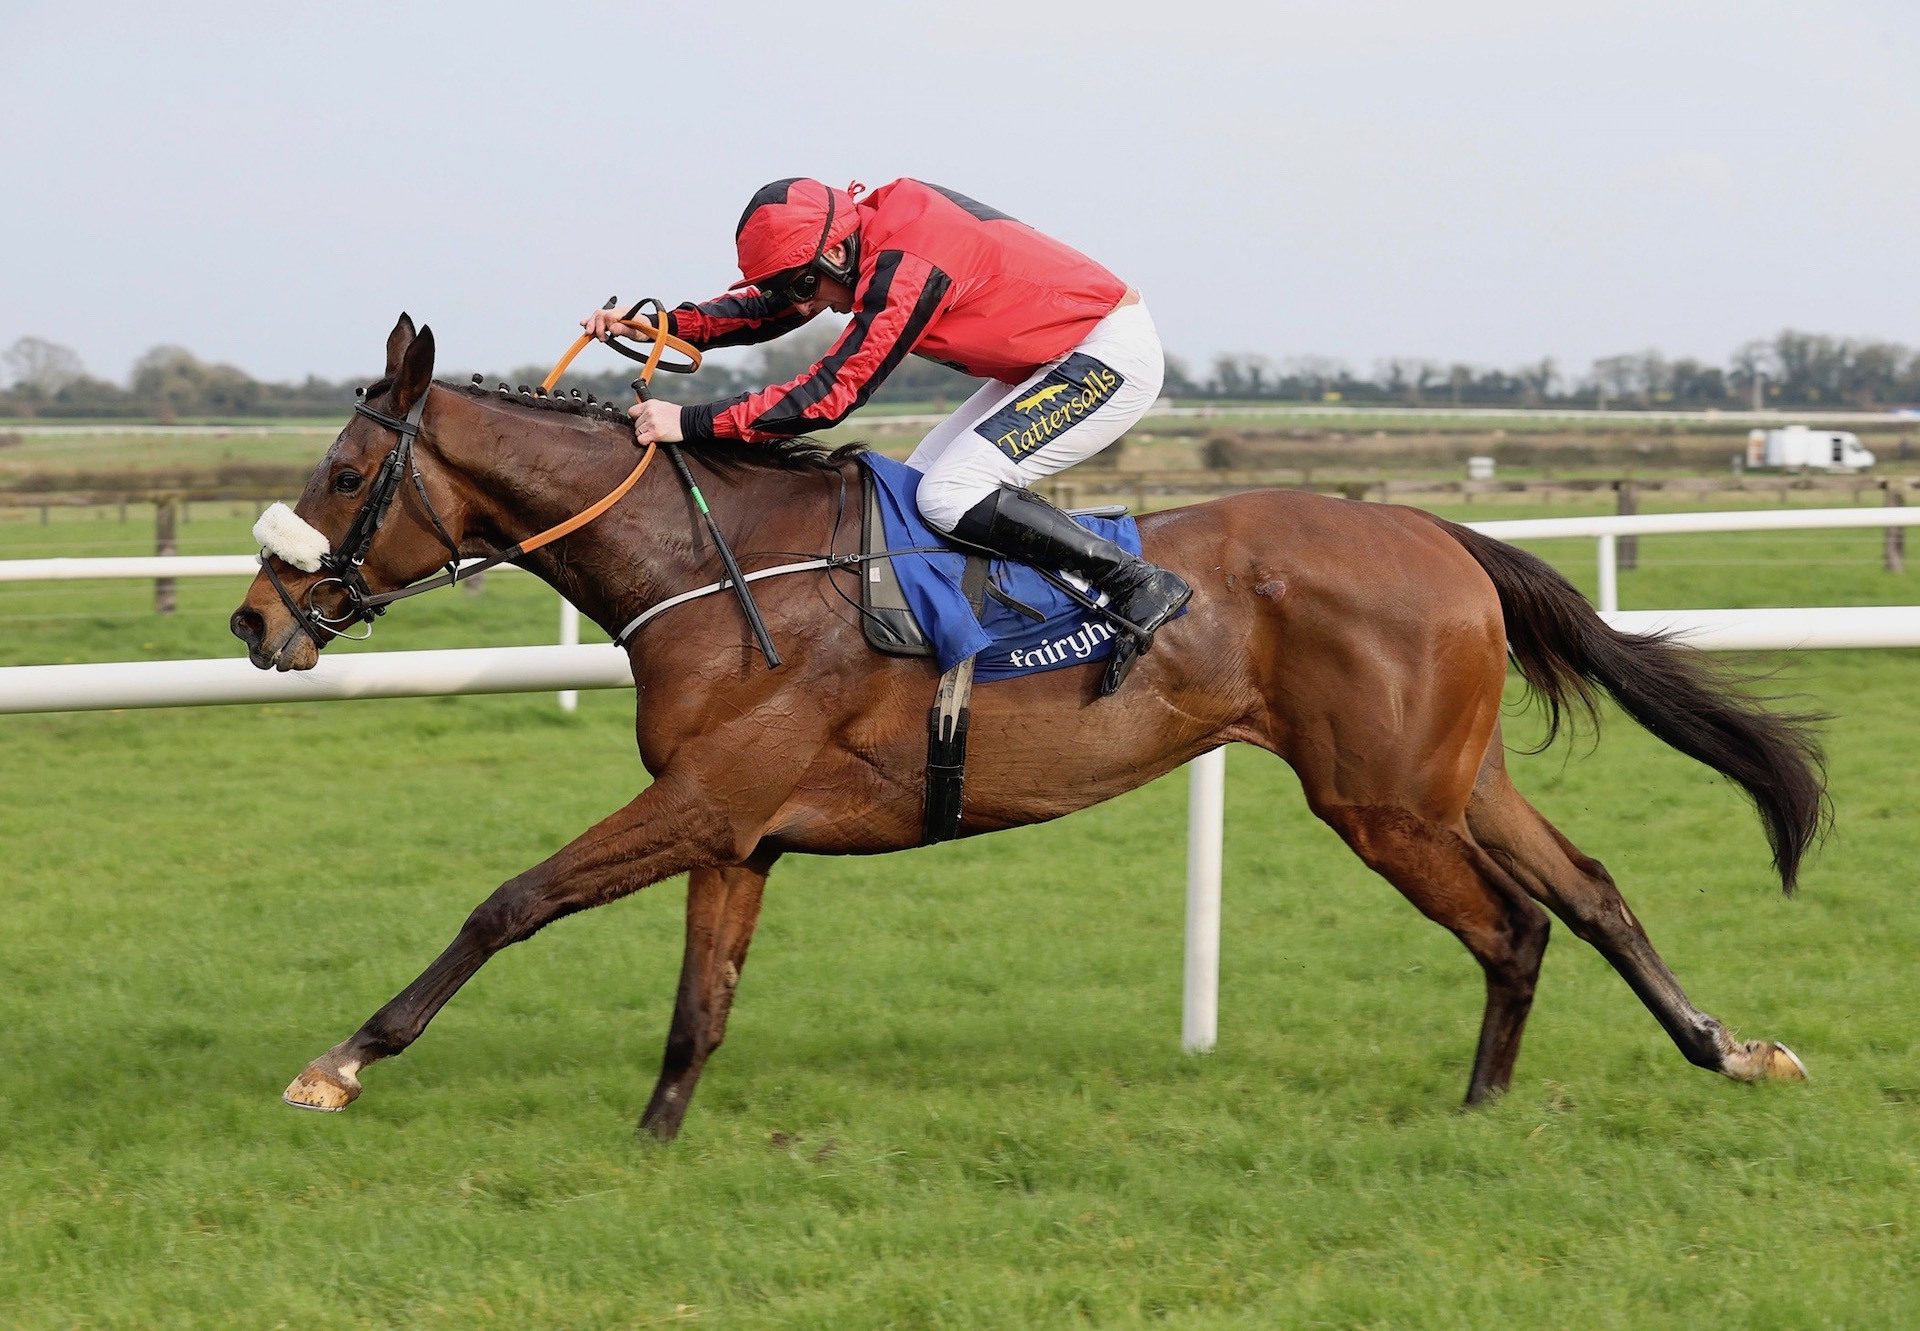 Tiger Bay Queen (Westerner) Wins The Listed Mares Bumper At Fairyhouse